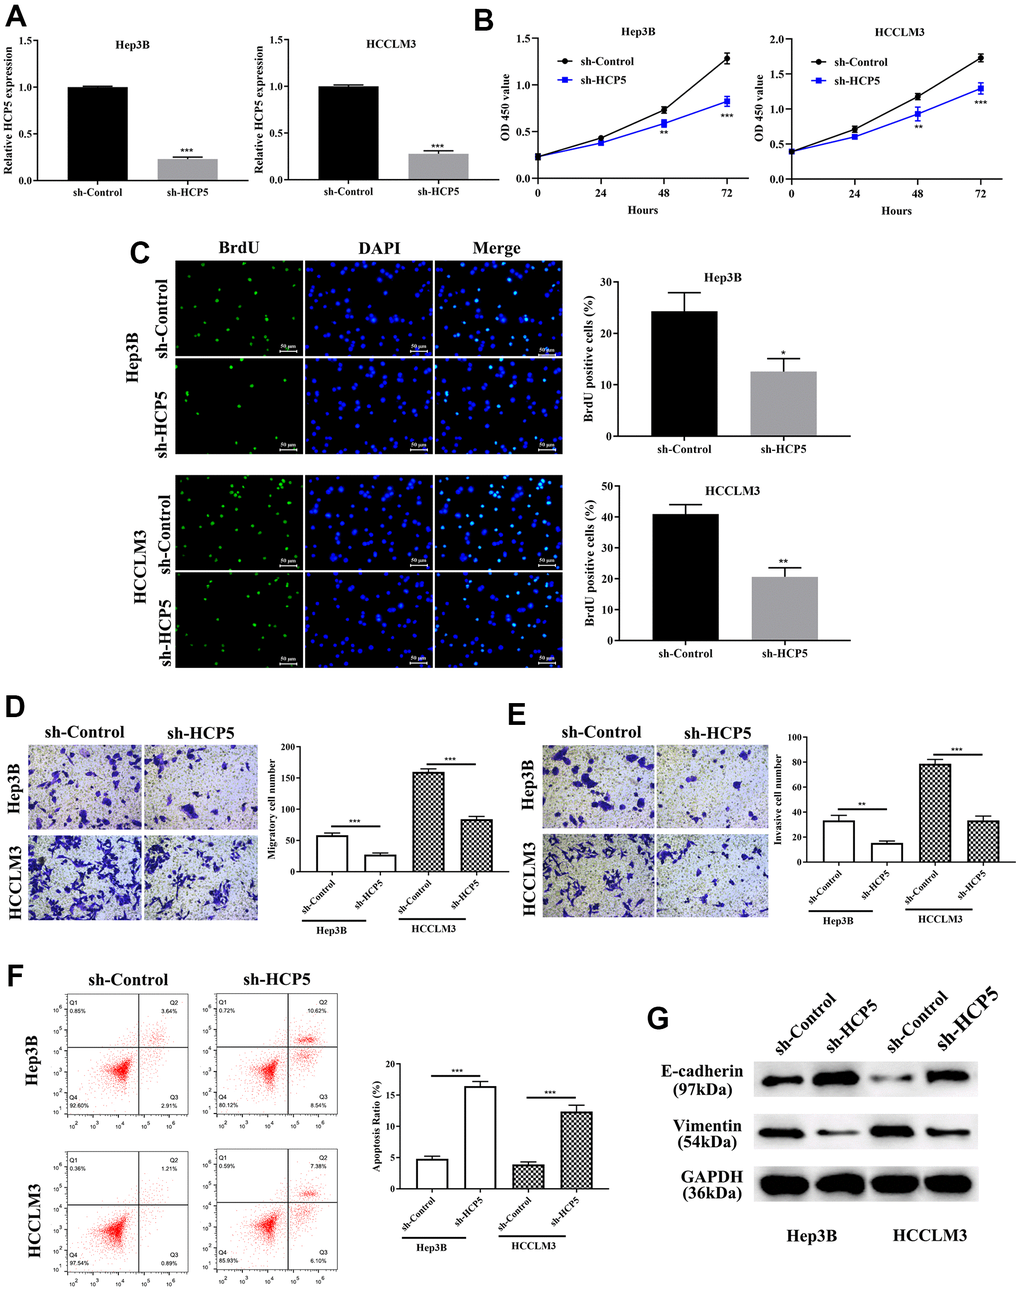 LncRNA HCP5 augments cell growth, metastasis, invasion, the epithelial-mesenchymal transition (EMT) process and prohibits hepatocellular carcinoma (HCC) cell apoptosis. (A) Construction of HCP5 knockdown in Hep3B and HCCLM3 cell lines was successful using sh-HCP5 (***pB, C) Compared to the sh-control, knockdown of HCP5 in HCCLM3 and Hep3B cells prohibited cell proliferation by the CCK-8 assay and BrdU assay (*pD, E) Down-regulation of HCP5 decreased migration and invasion in HCCLM3 and Hep3B cell lines (***pF) Cell apoptosis was promoted in HCP5 knockdown cells (***pG) Western blot showing that EMT-related protein E-cadherin was overexpressed in the HCP5 down-regulated group while the expression of vimentin was inhibited.